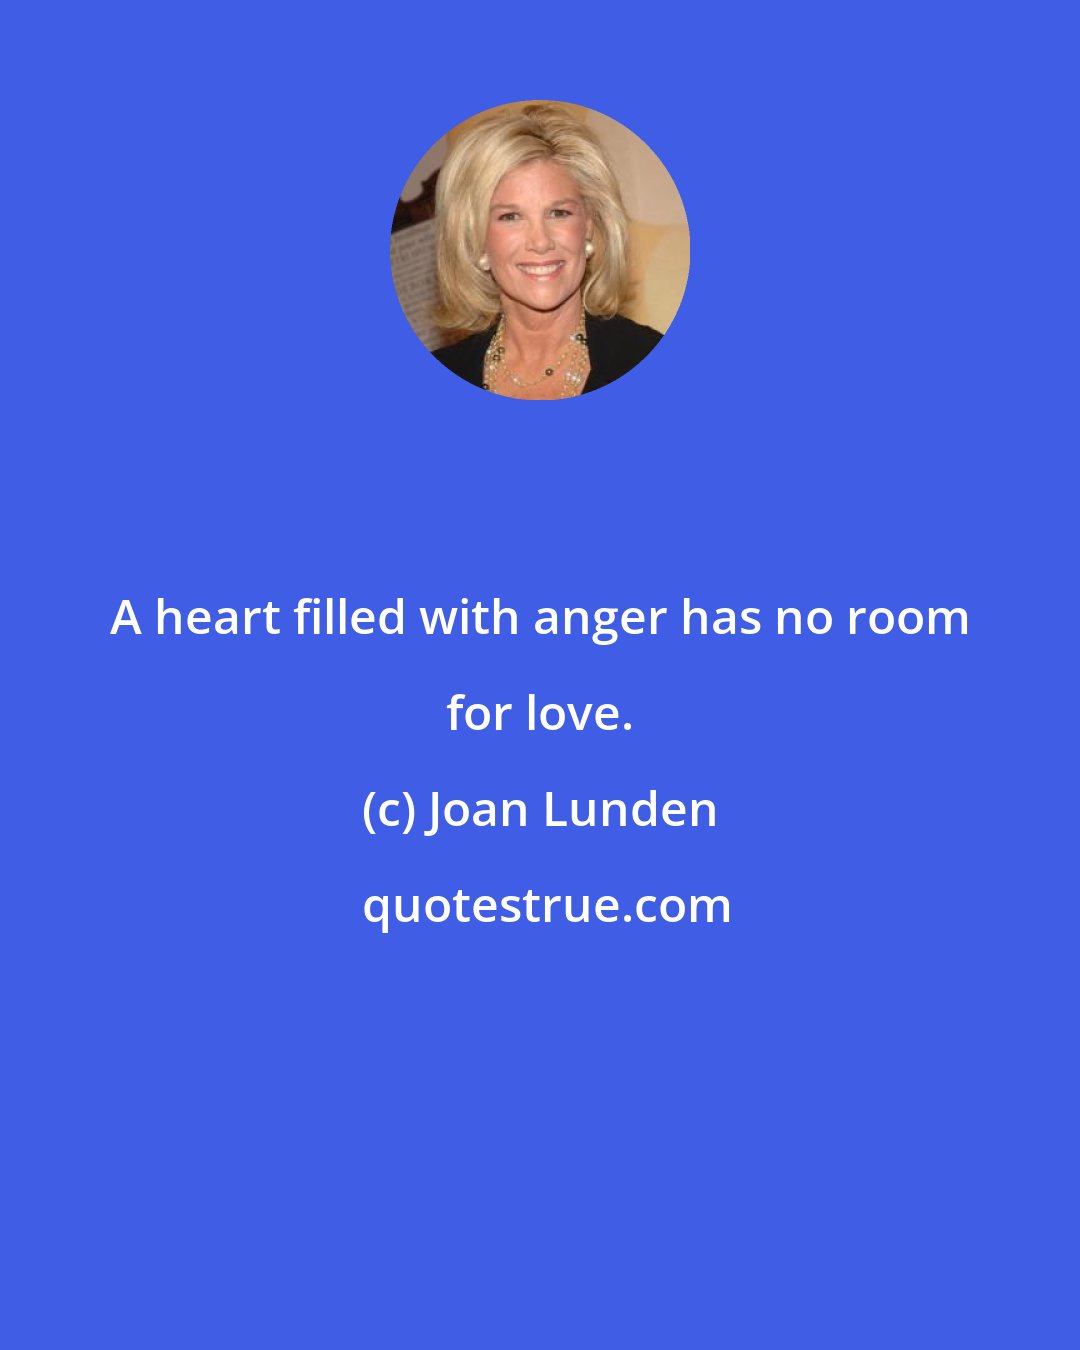 Joan Lunden: A heart filled with anger has no room for love.